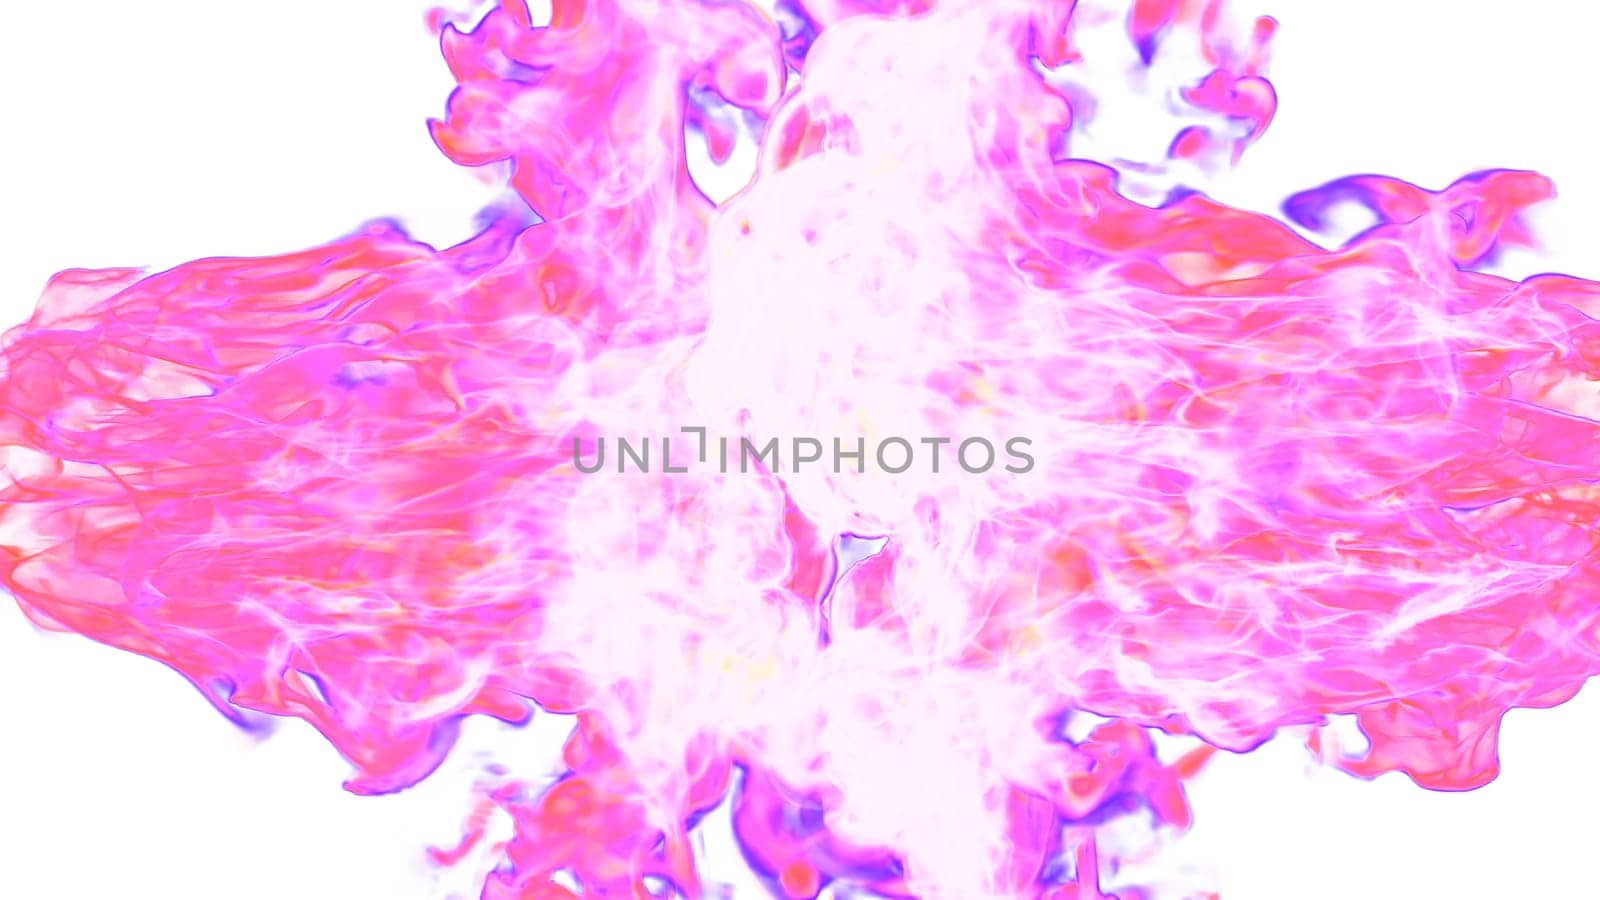 3d illustration. Tongues of pink flame collide from opposite sides on a white background. by mrwed54